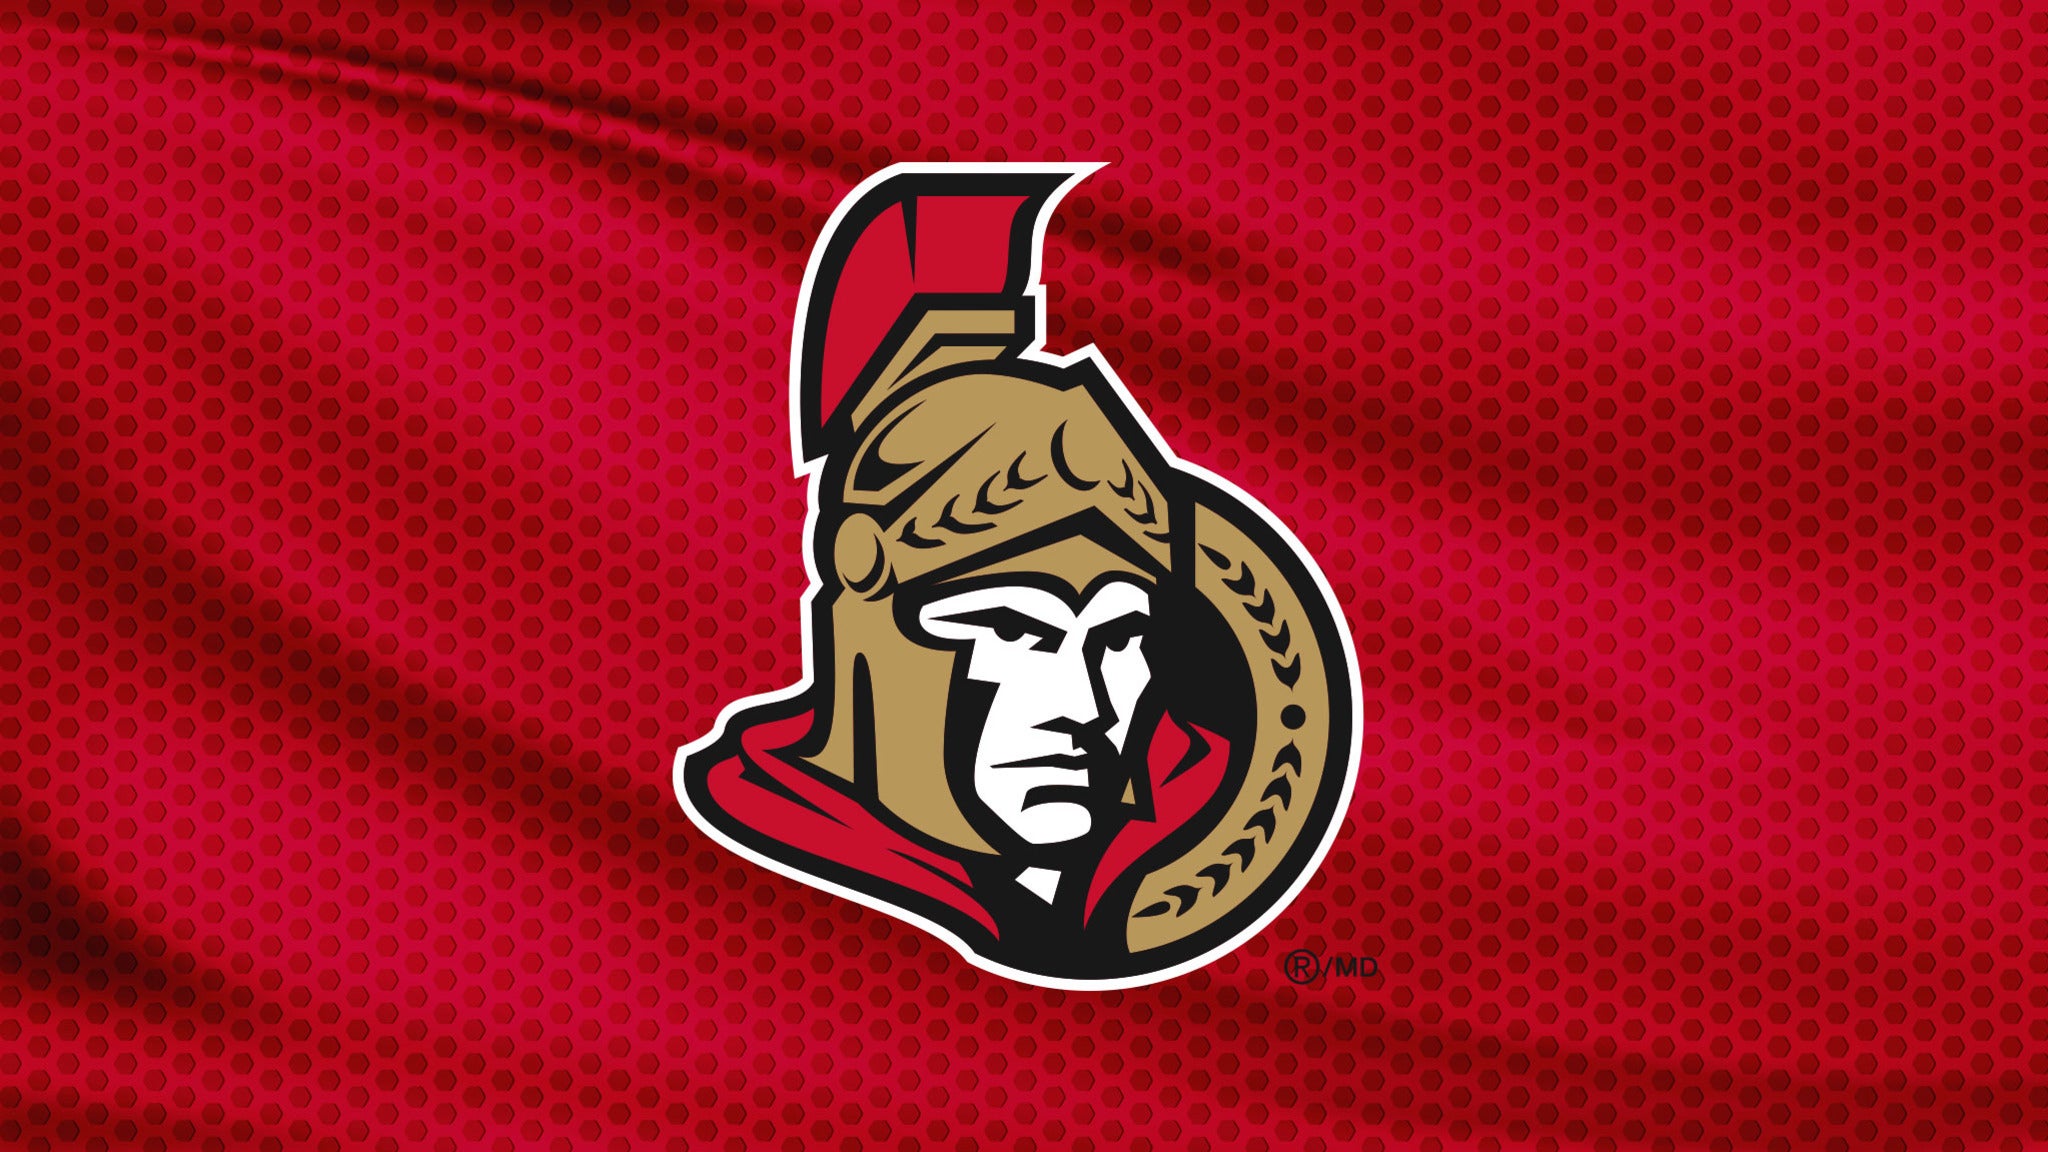 Image used with permission from Ticketmaster | Ottawa Senators vs. Florida Panthers tickets